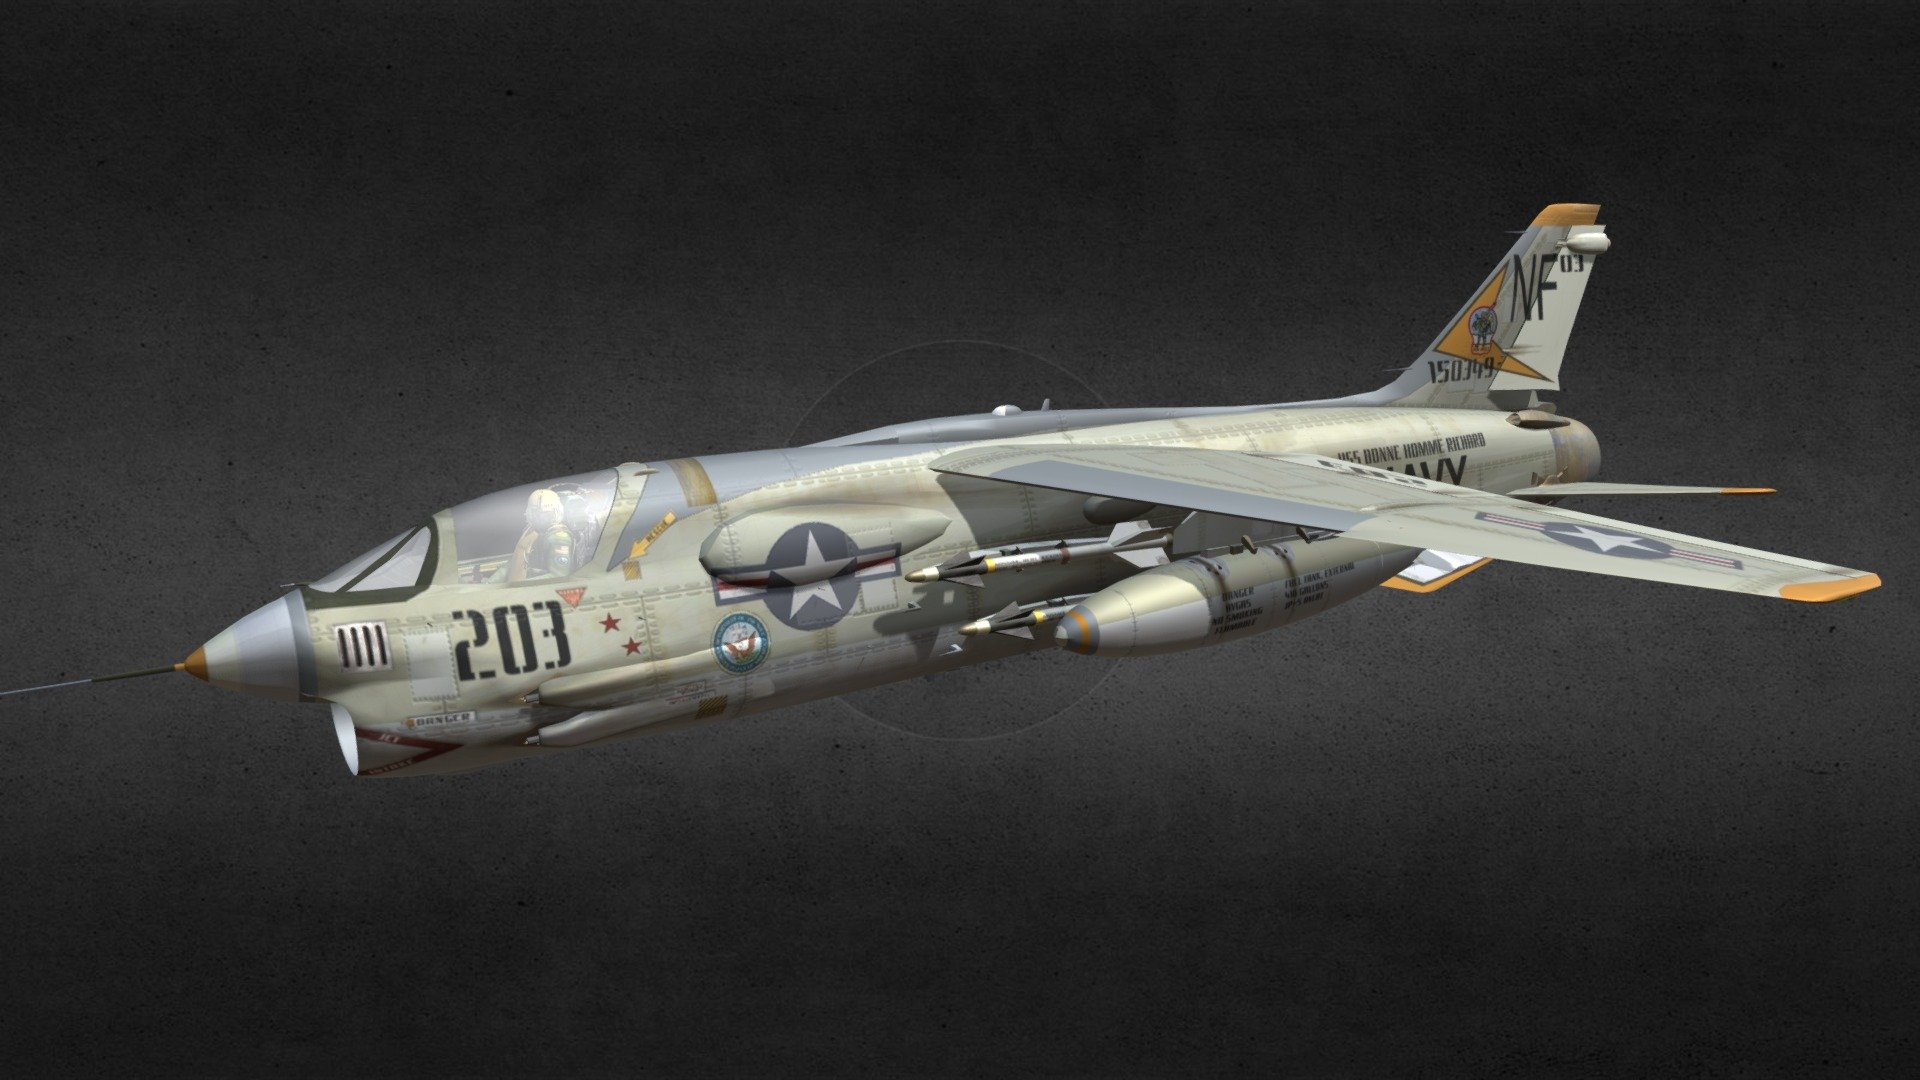 The Vought F-8 Crusader (originally F8U) was a single-engine, supersonic, carrier-based air superiority jet aircraft built by Vought for the United States Navy and Marine Corps, replacing the Vought F7U Cutlass, and for the French Navy.

Product Features:




Includes the aircraft, pilot, Aim-9 Sidewinders, and wing-mounted drop tanks.

The aircraft includes tons of groups, which your software should read as separate parts, including:

Canopy, rudder, flaps, elevator, ailerons, drag chute, landing gear and doors, nose cone, cockpit controls, speed brake, and more.

The model is UV mapped and texture/ bump maps, at 3500x1800 pixels, are included.

Original model by, and acquired from Chris Schell, and now owned by VanishingPoint 3d model